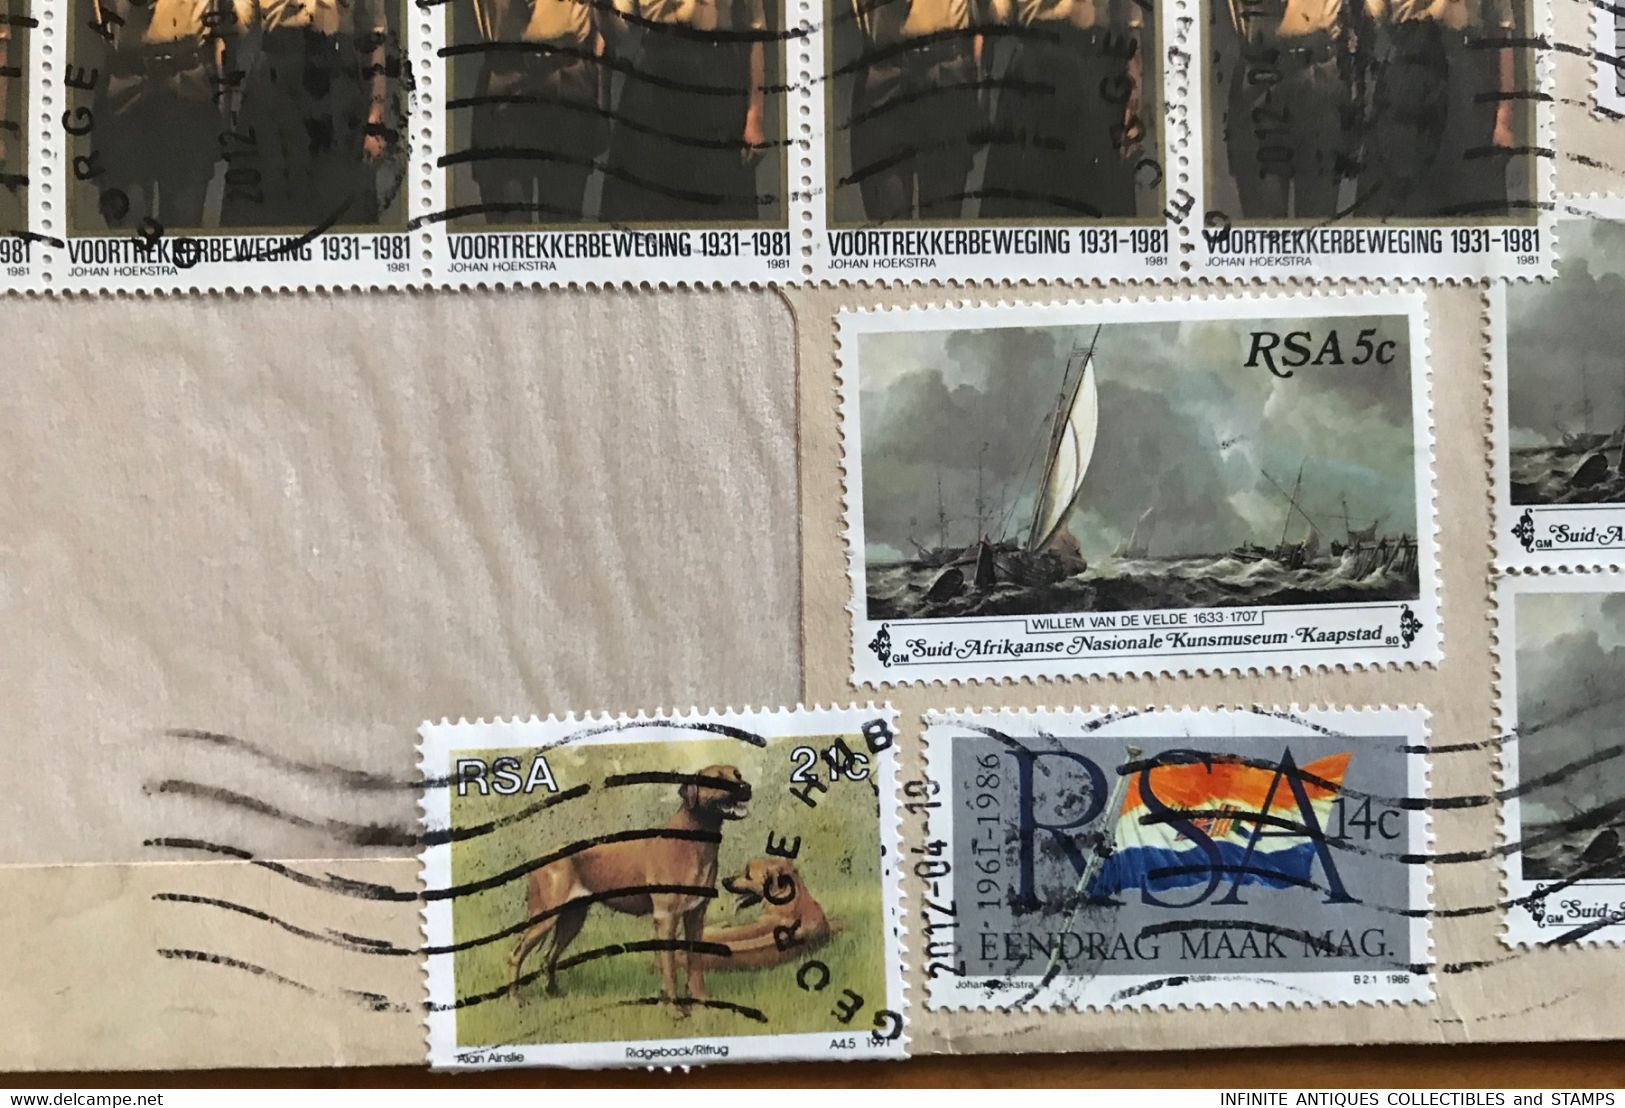 SOUTH AFRICA=LETTER=2012=GEORGE POSTMARK=CDS=CAPE PROVINCE=Mixed Stamps On Cover=BOYSCOUTS=DOG=FLAG=SAILING SHIP=BEADS - Covers & Documents